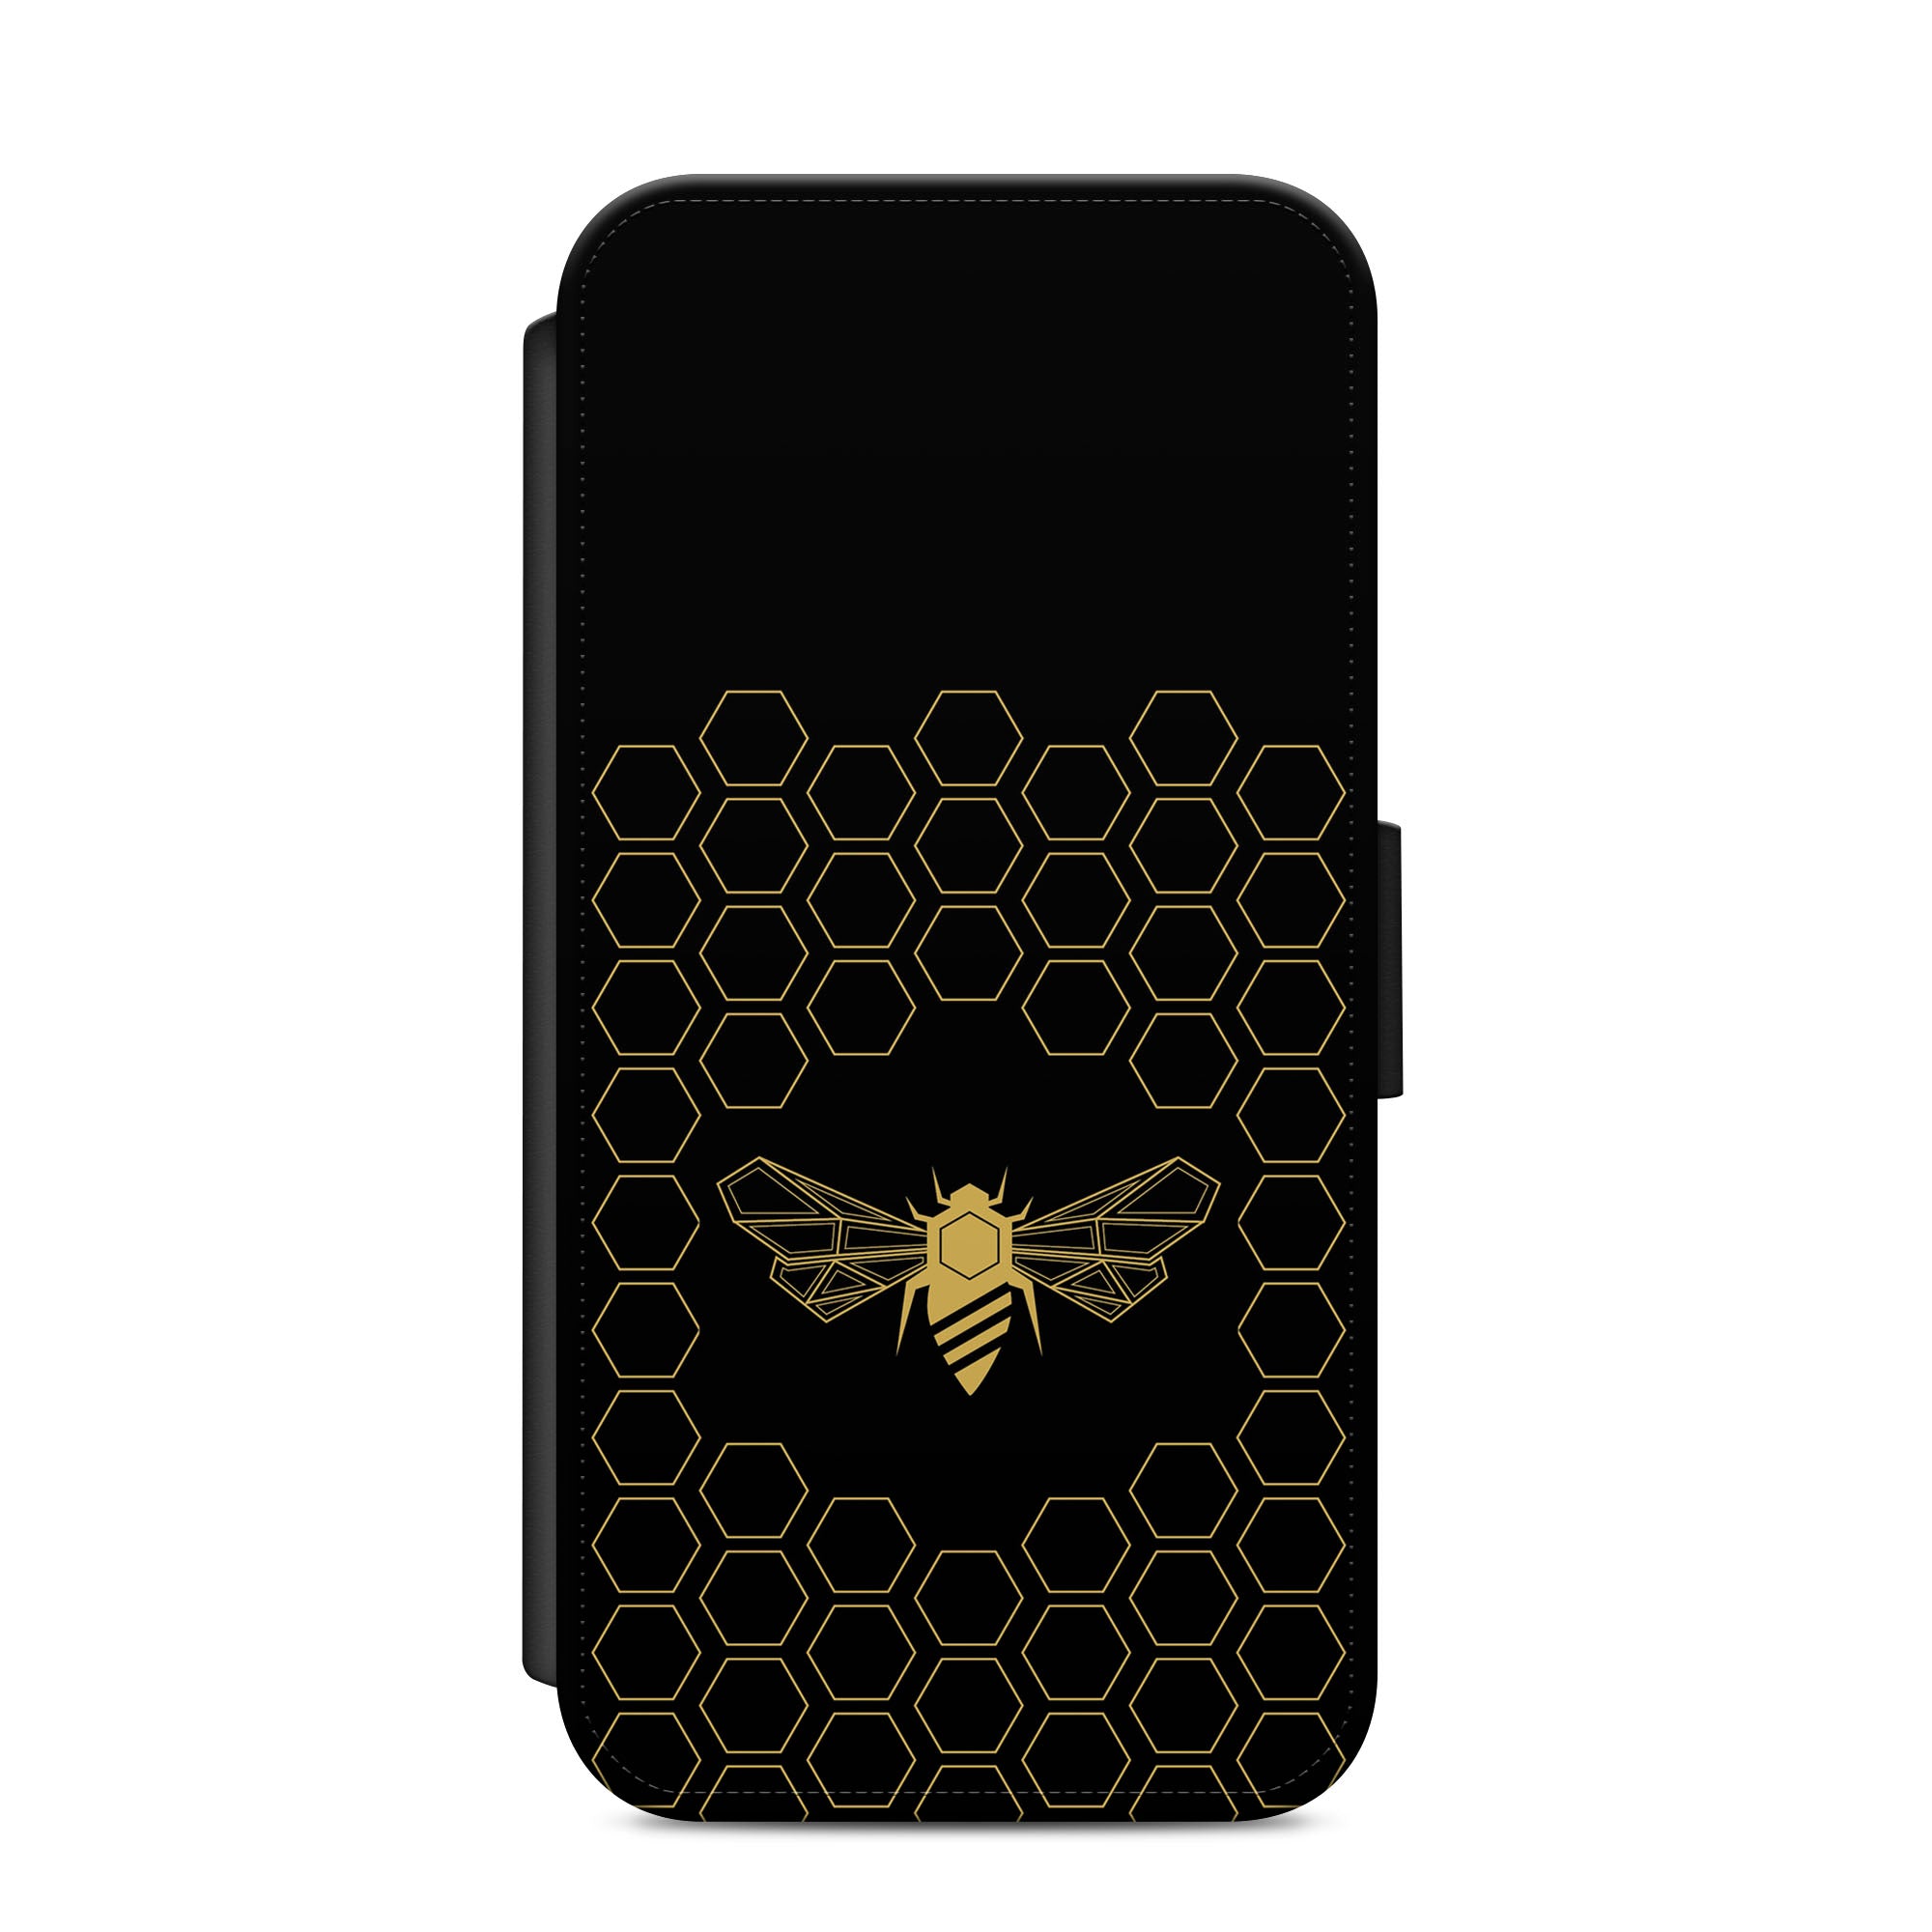 Bumble Bee Honeycomb Faux Leather Flip Case Wallet for iPhone / Samsung